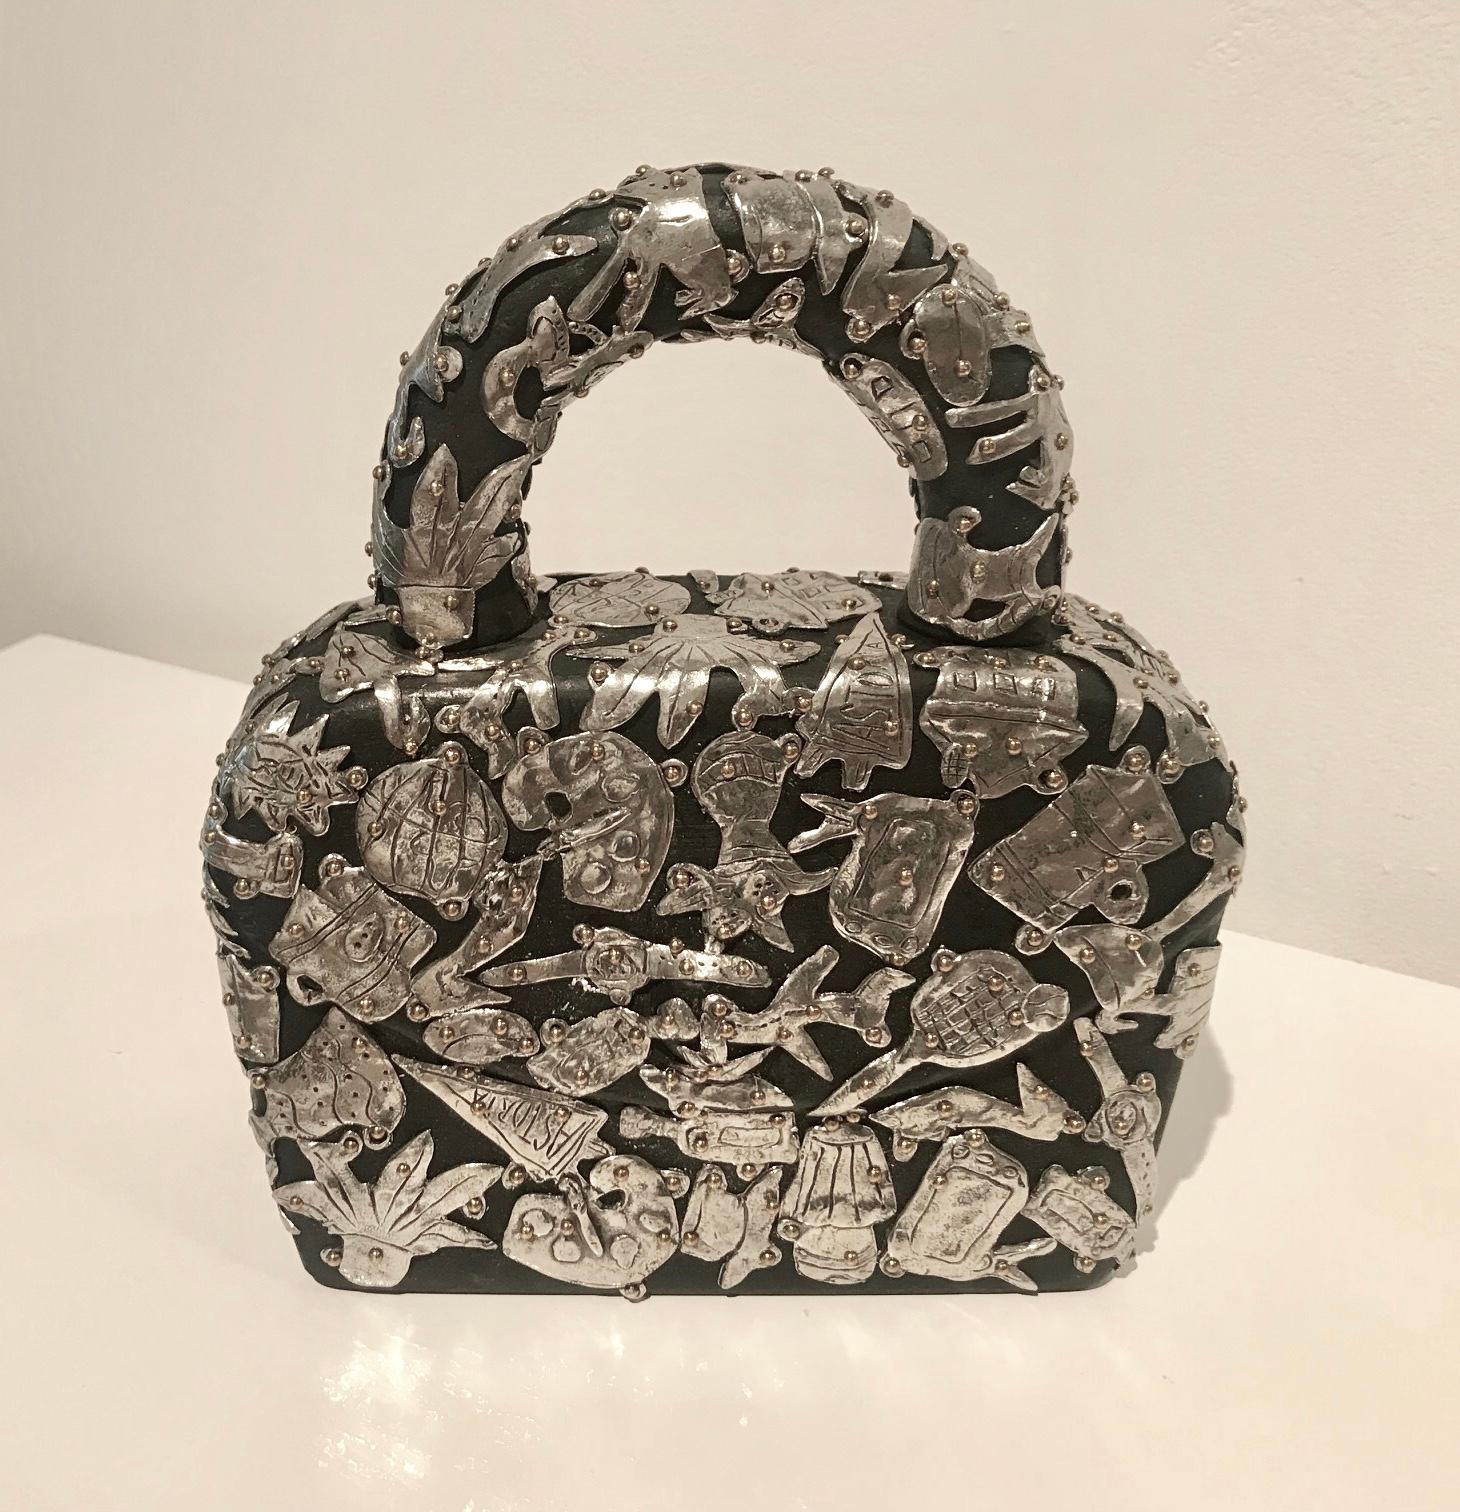 Female Fetish Small Handbag, small scale sculpture in pewter and wood - Art by Claudia DeMonte